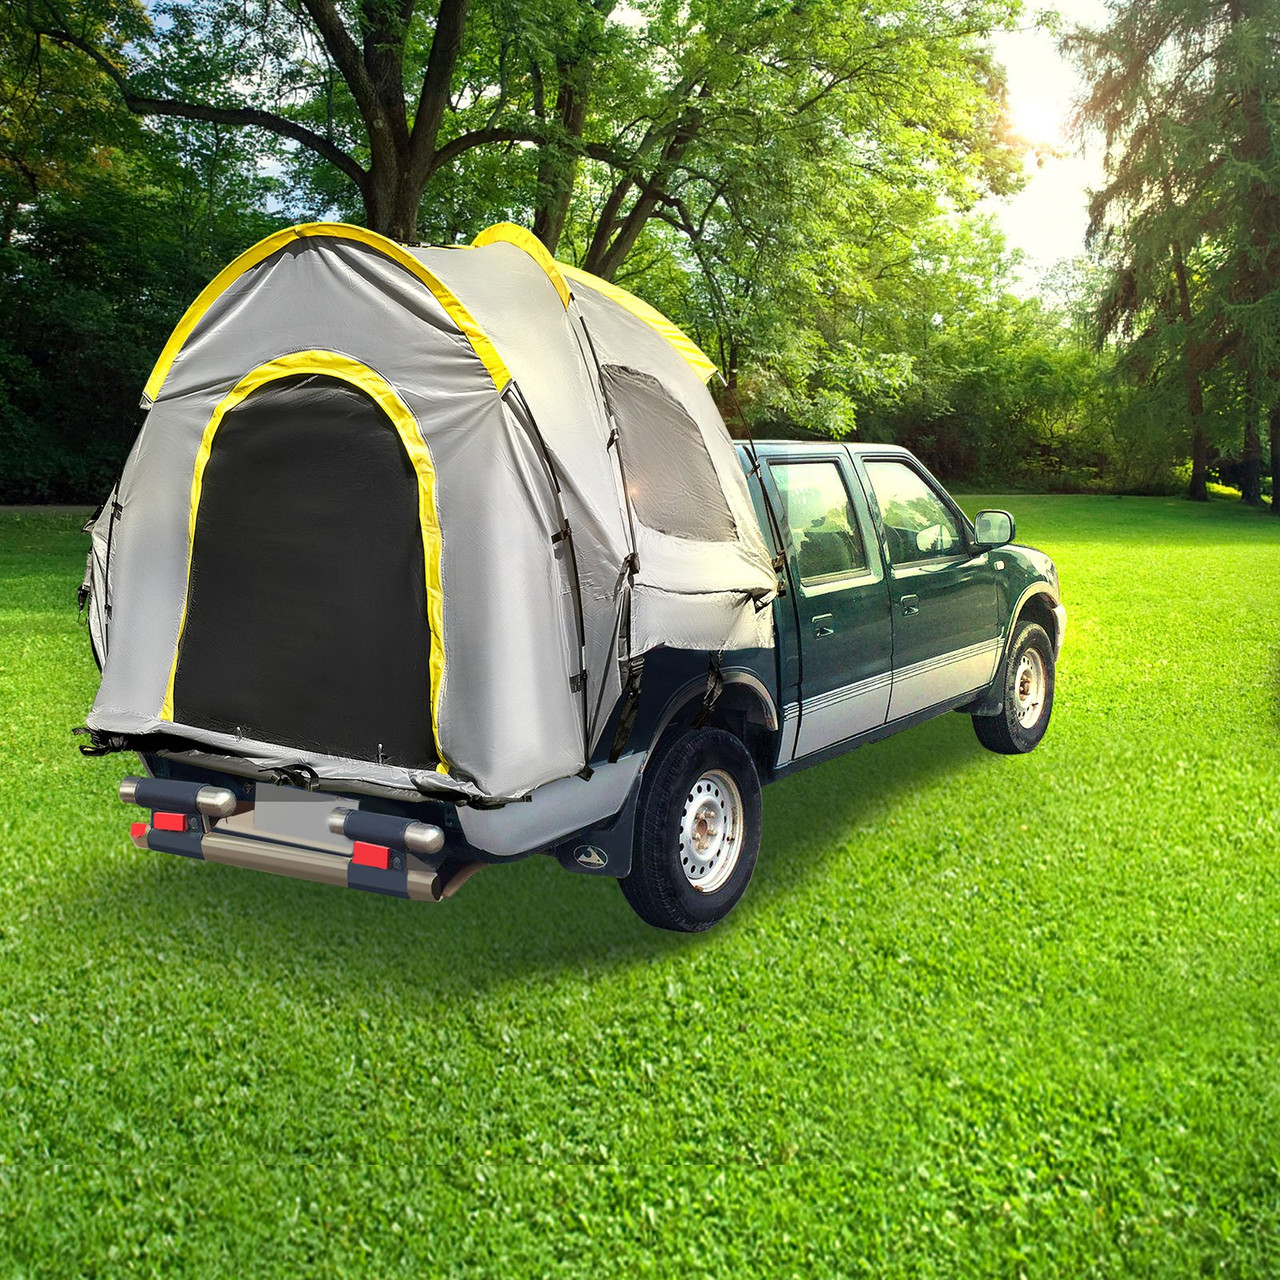 Truck Tent 8, Truck Bed Tent, Pickup Tent for Full Size Truck, Waterproof Truck Camper, 2-Person Sleeping Capacity, 2 Mesh Windows, Easy to Setup Truck Tents for Camping, Hiking, Fishing